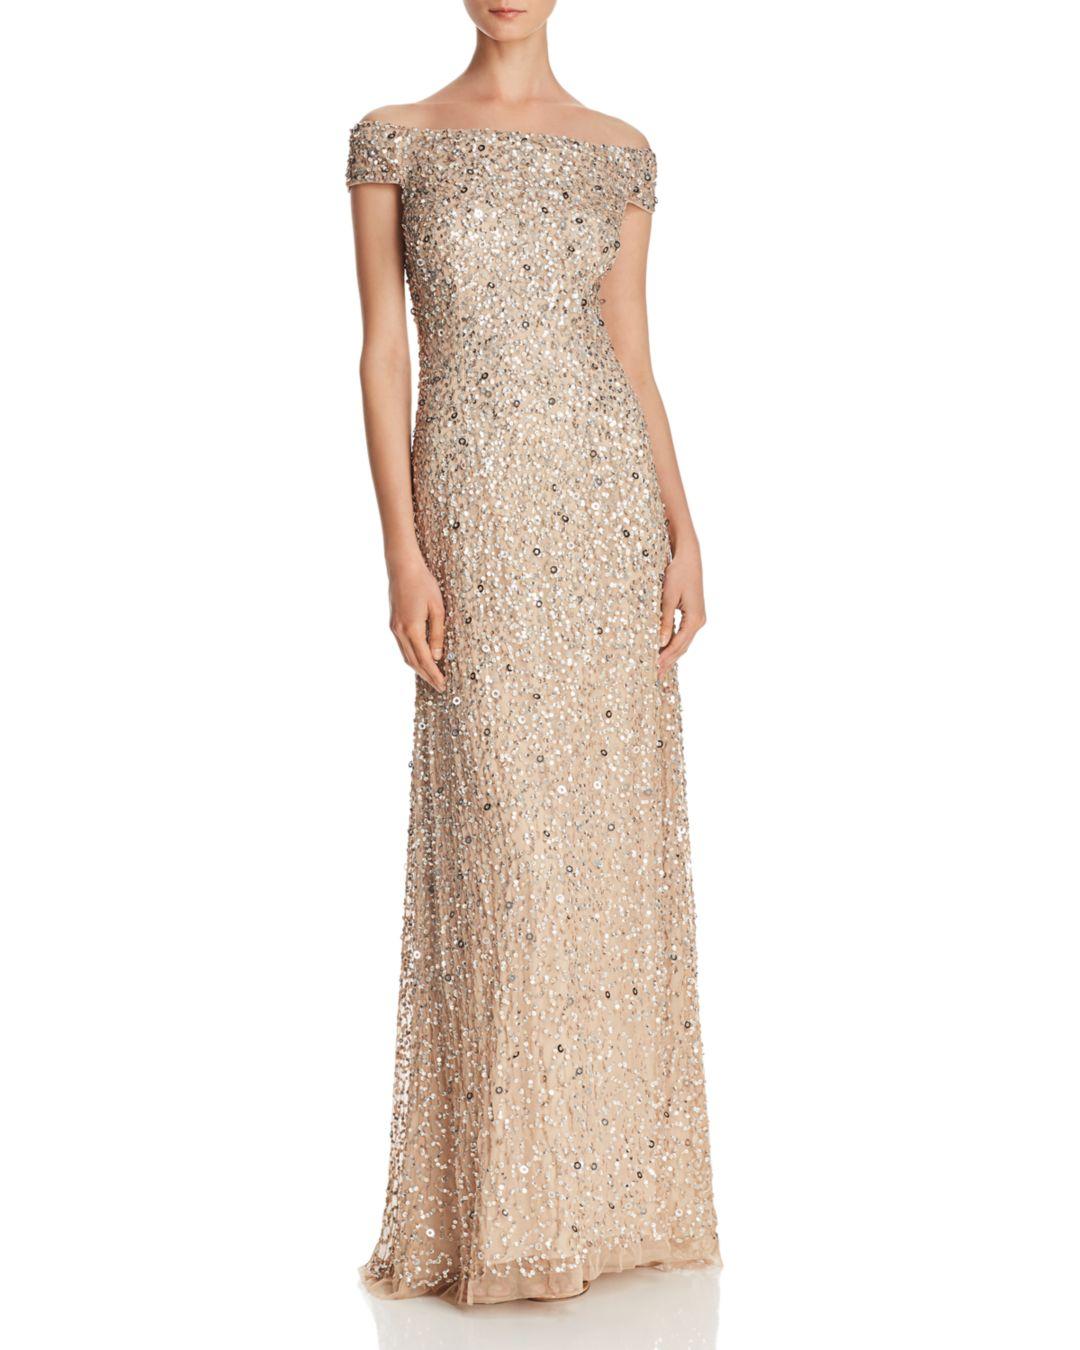 Lyst - Adrianna Papell Off-the-shoulder Sequined Gown in Metallic